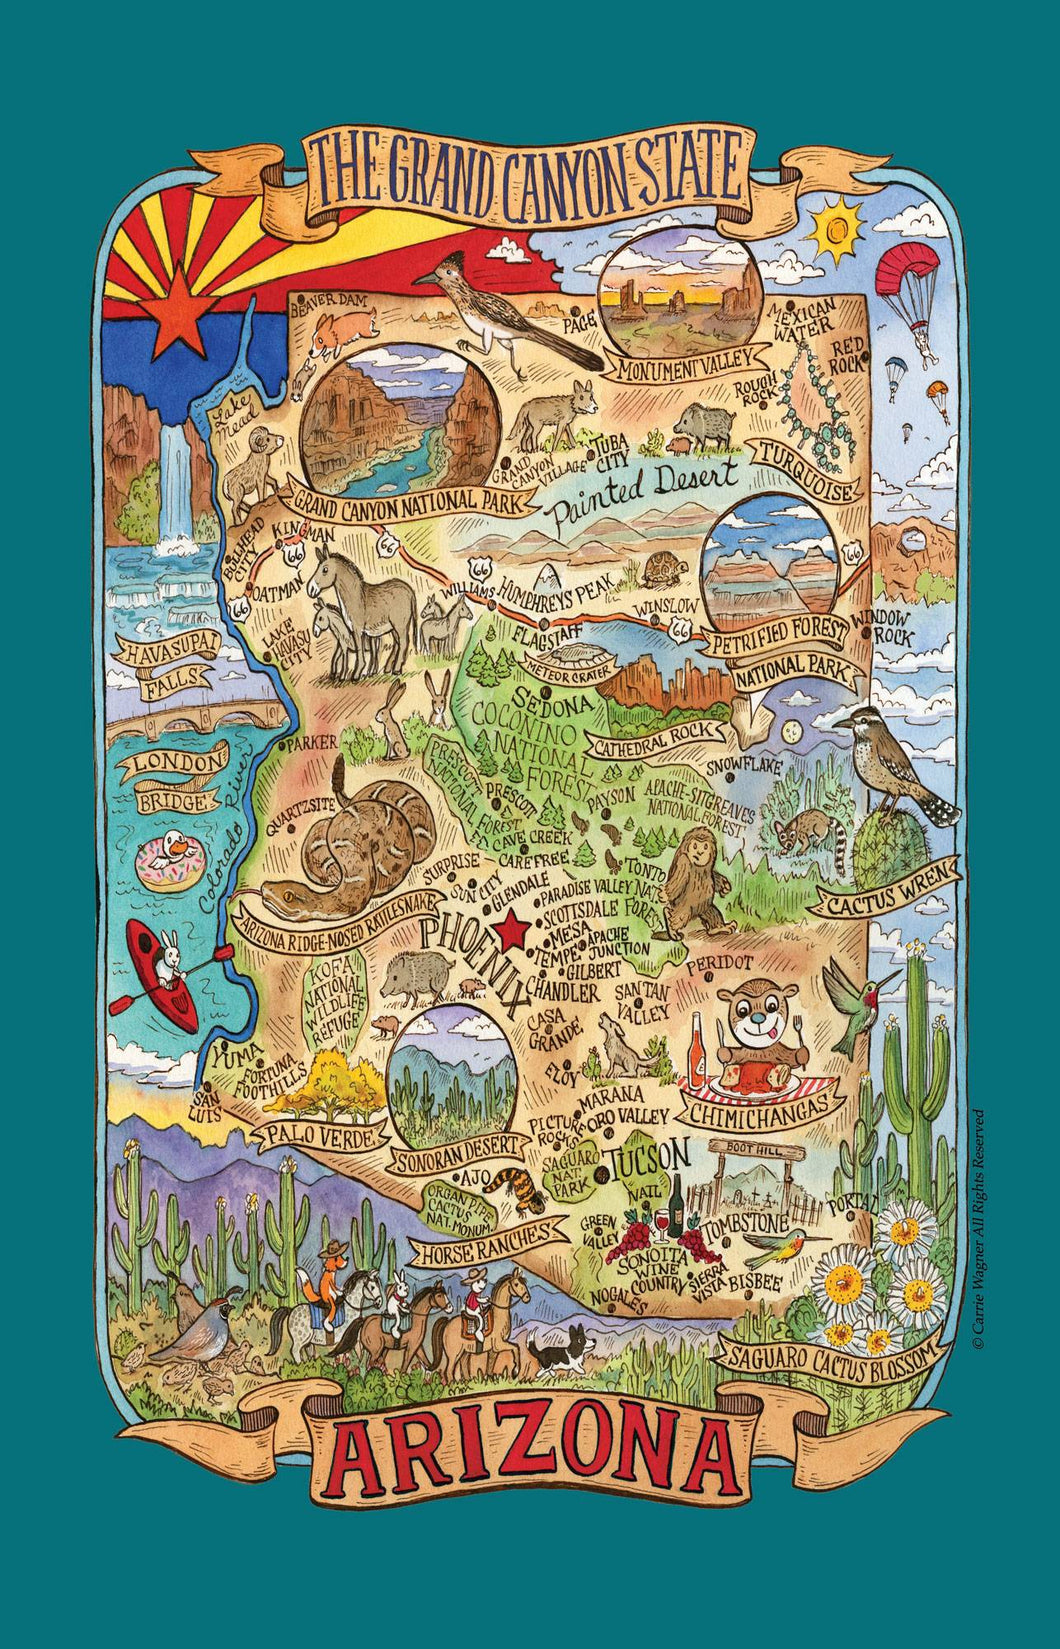 Adorable artwork by artist Carrie Wagner depicts the most exciting destinations in the city or state! Use as a kitchen towel or display as a souvenir! 18 in x 28 in, 100% cotton. (6236527067334)